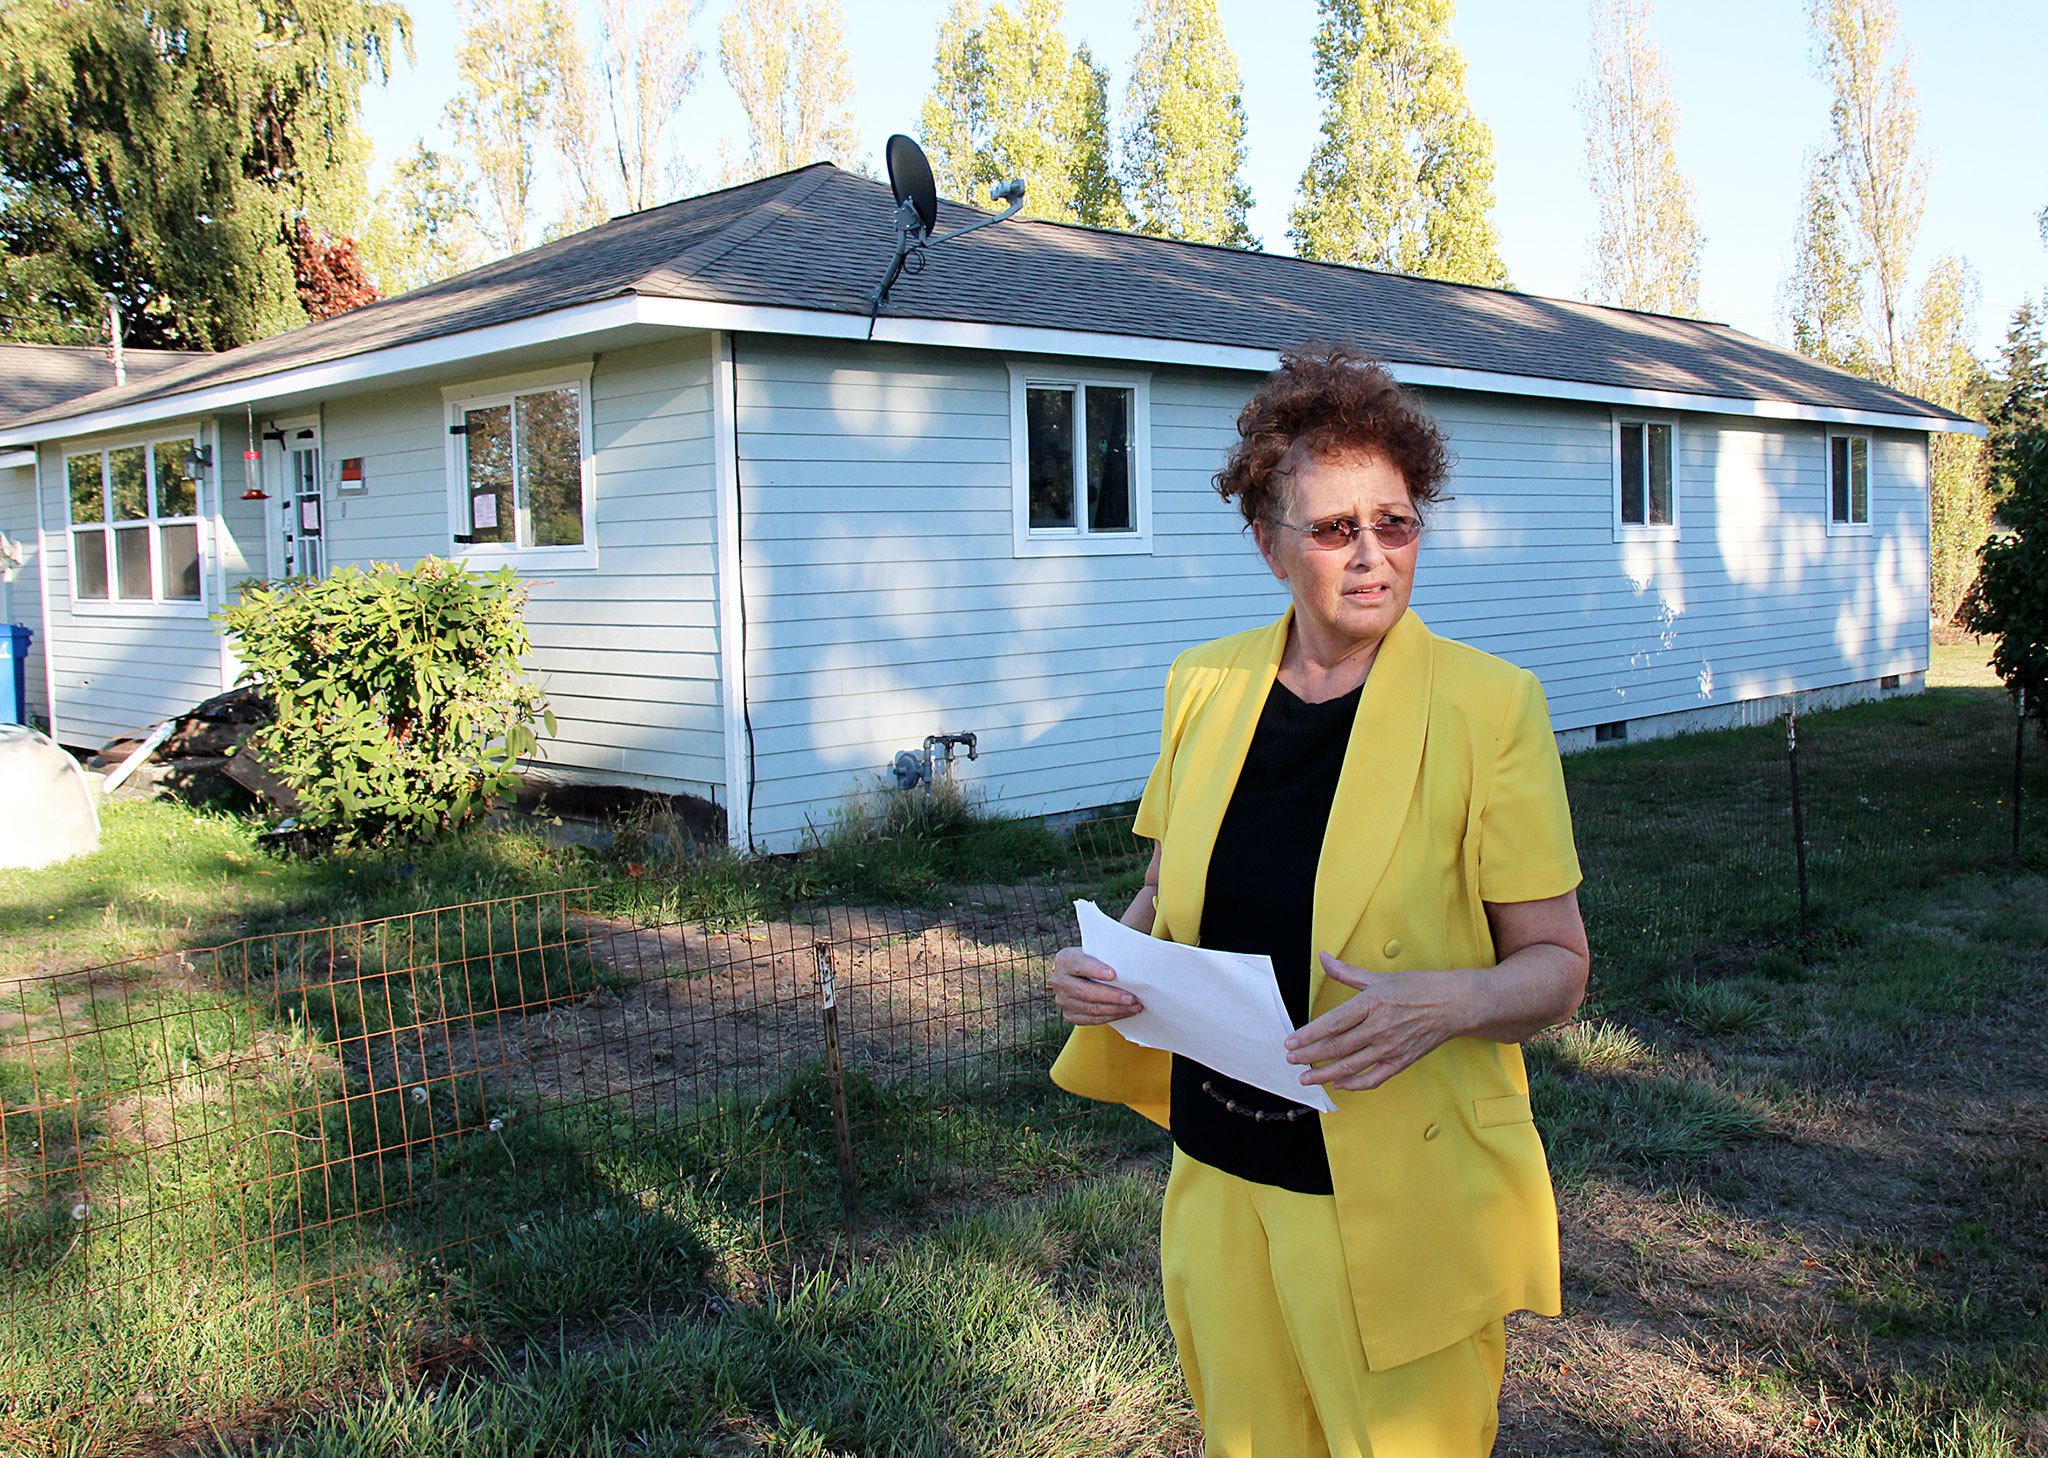 Oak Harbor resident Dee Holwitz stands in her front yard, which is next to a former nuisance house that’s been cleaned up thanks to her persistence. Photo by Jessie Stensland / Whidbey News-Times